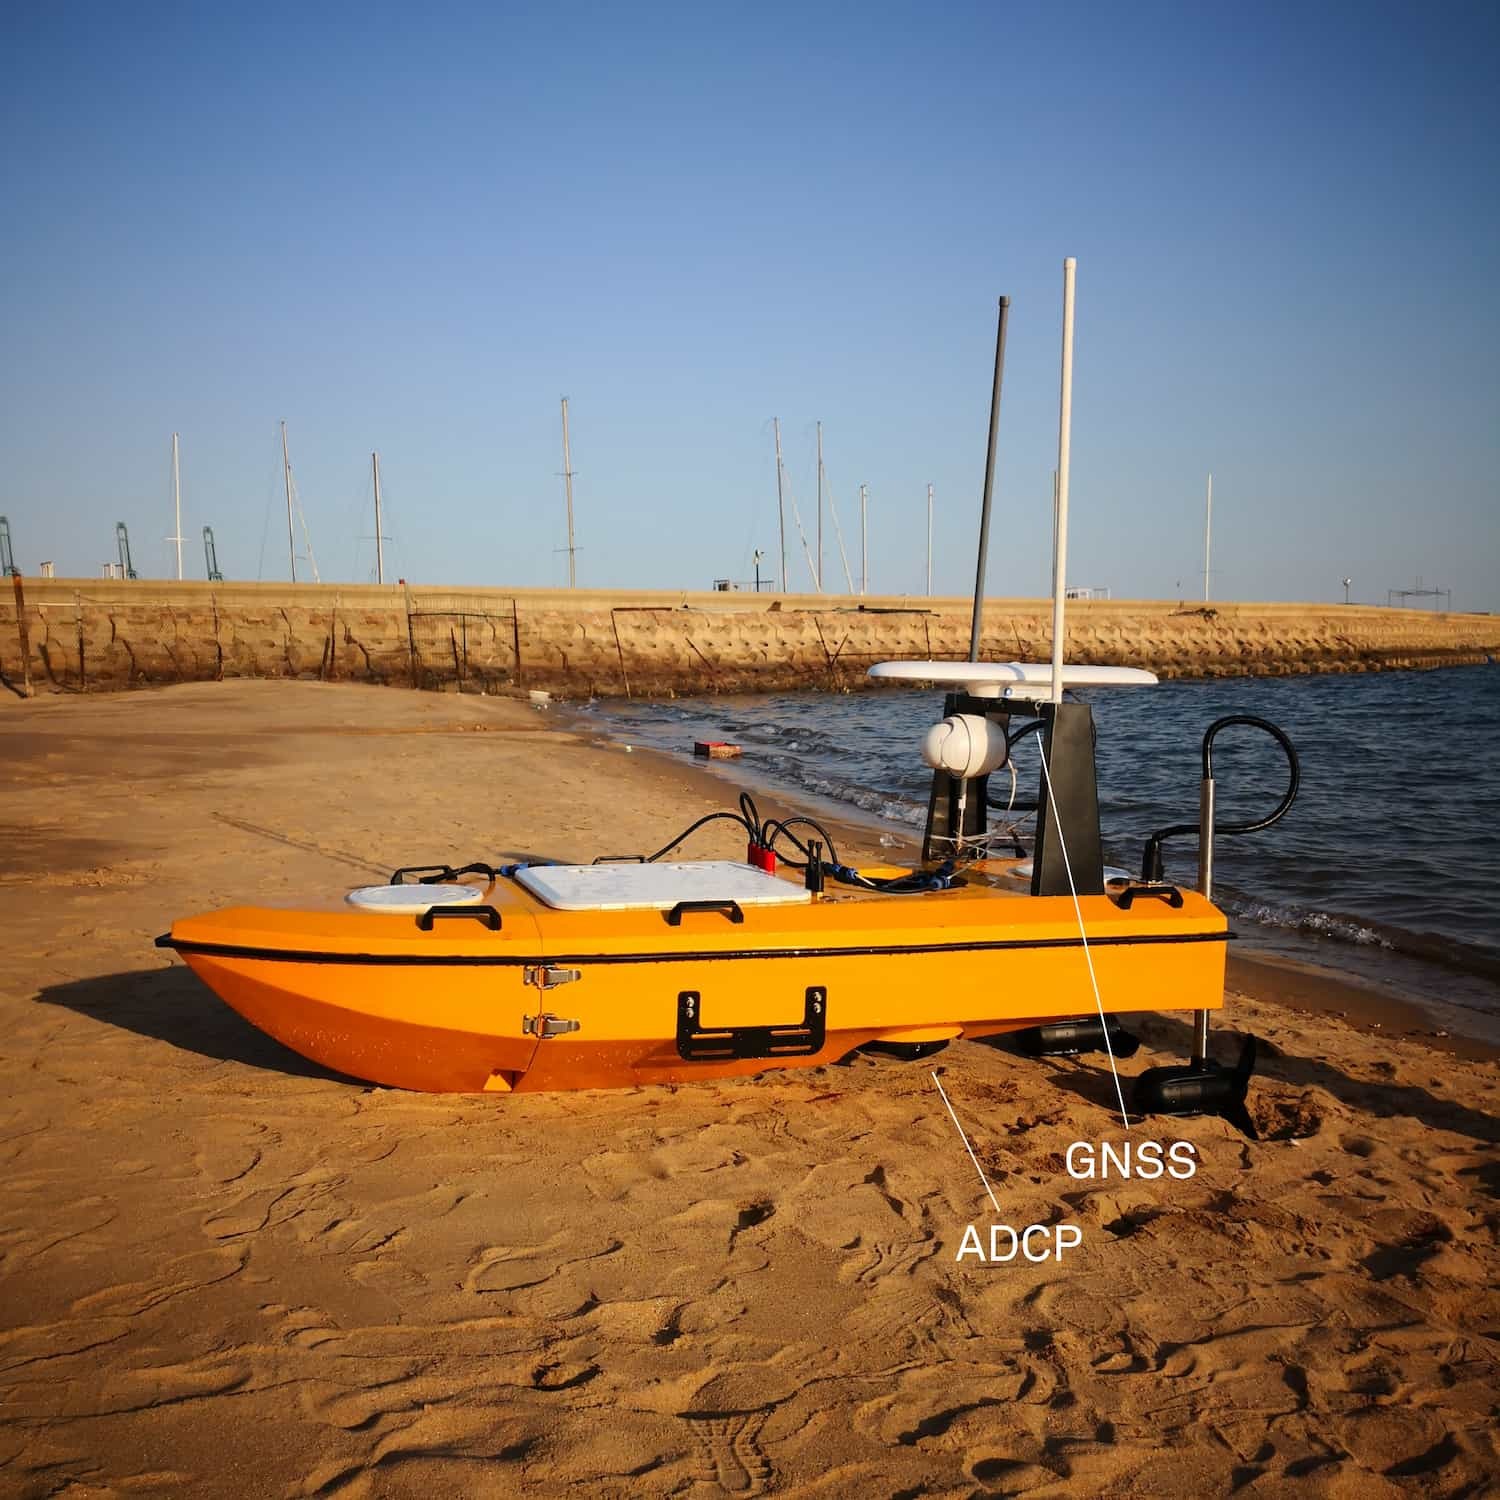 USV equipped with the Signature VM Ocean system and the Signature Service software for USVs and ASVs to measure water current and direction.